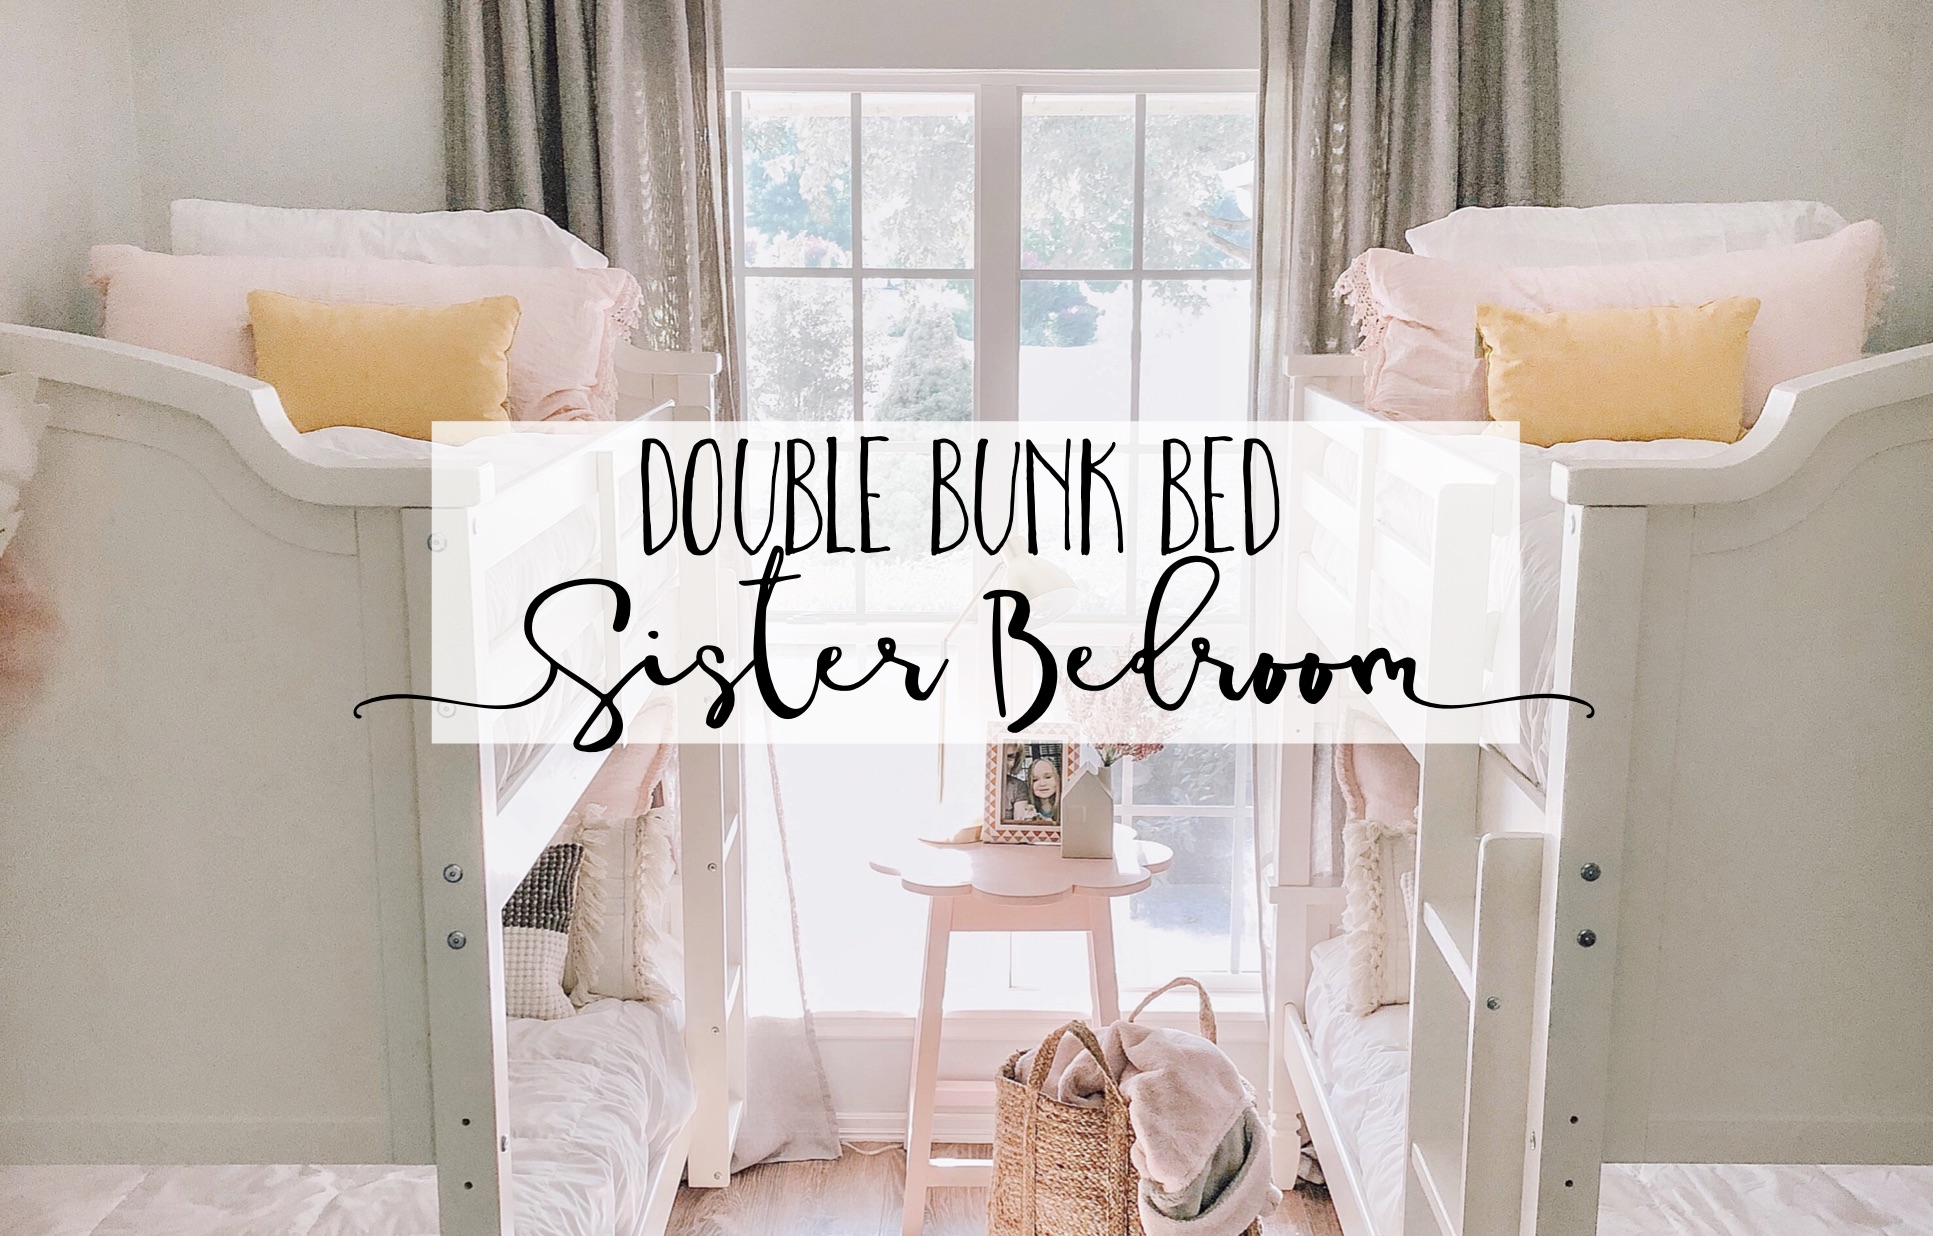 Double bunk bed sister room! - Cotton Stem